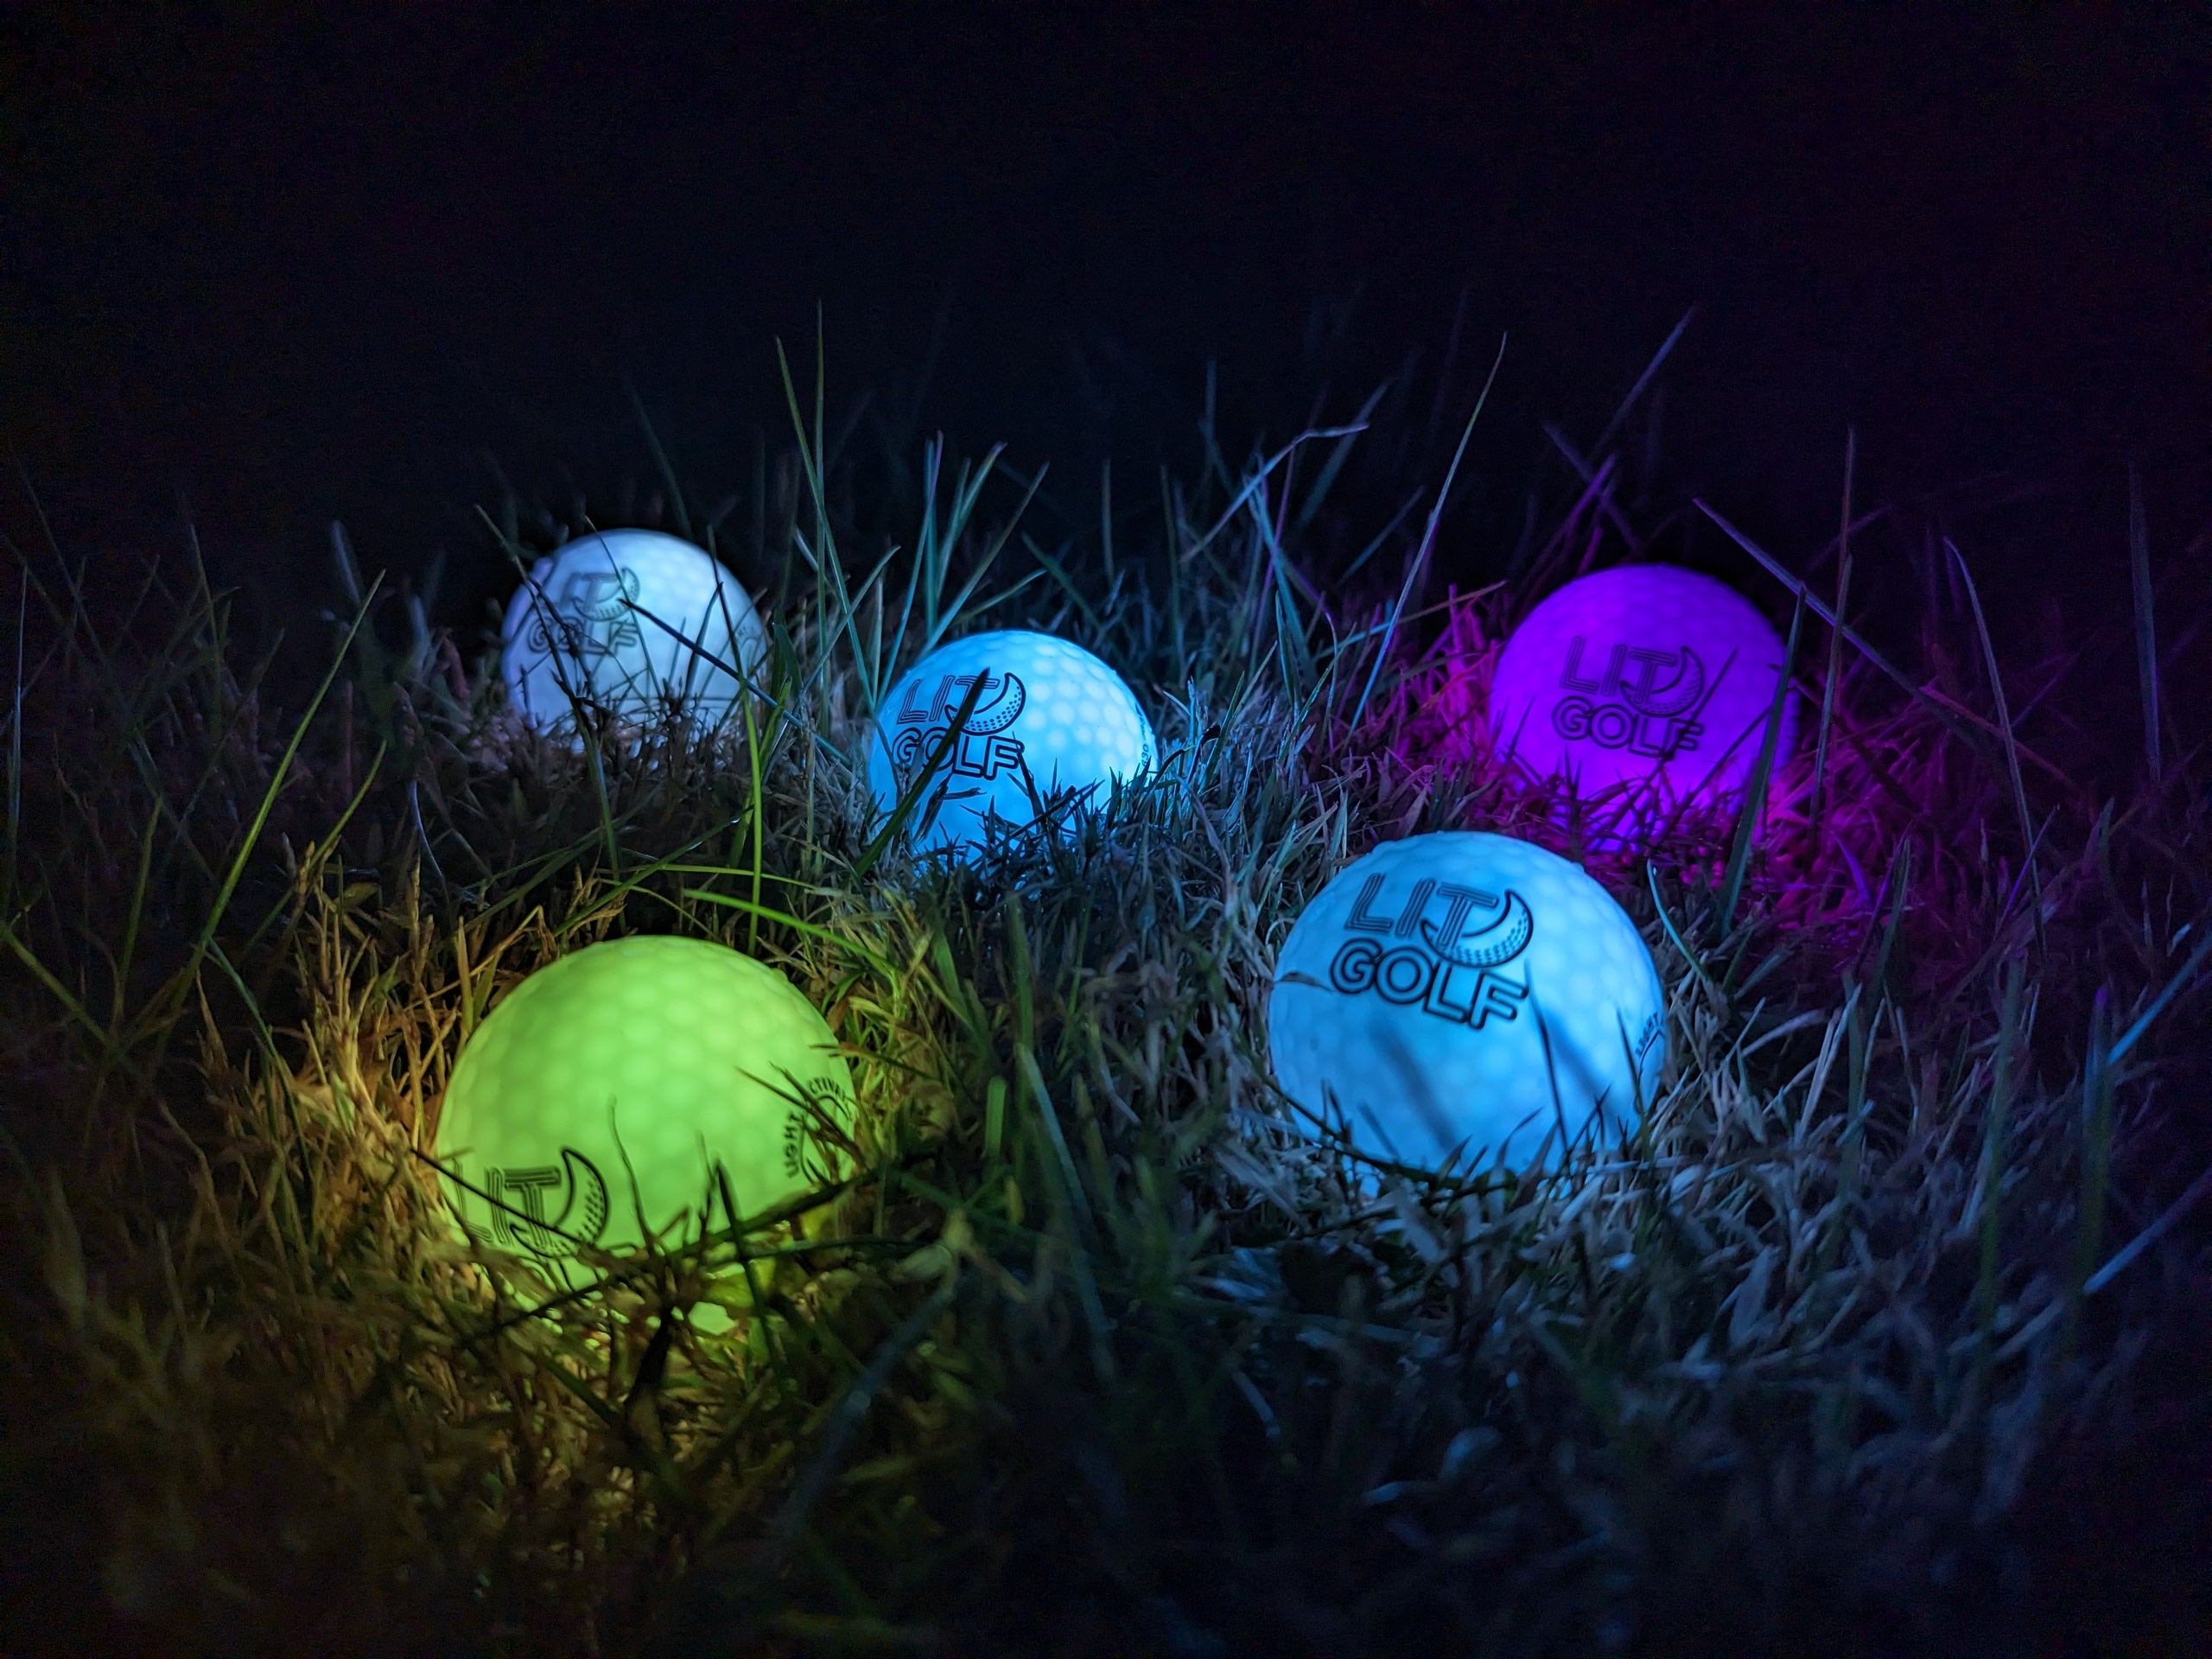 Why Isn't There More Night Golf?